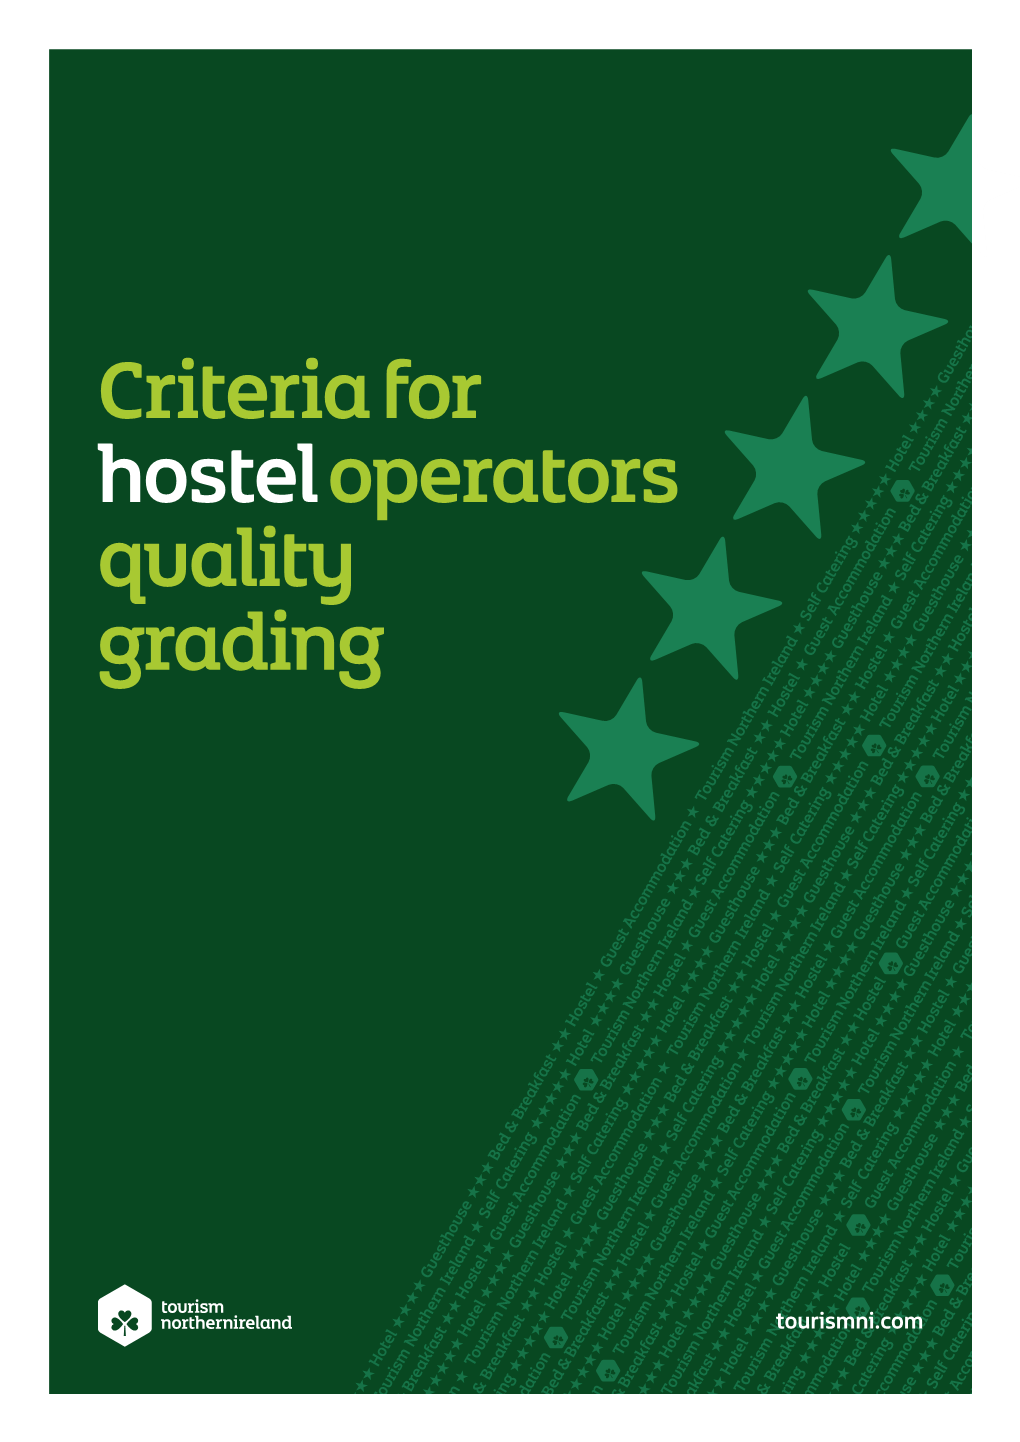 Criteria for Hostel Operators Quality Grading 2015 1.0 General Overview